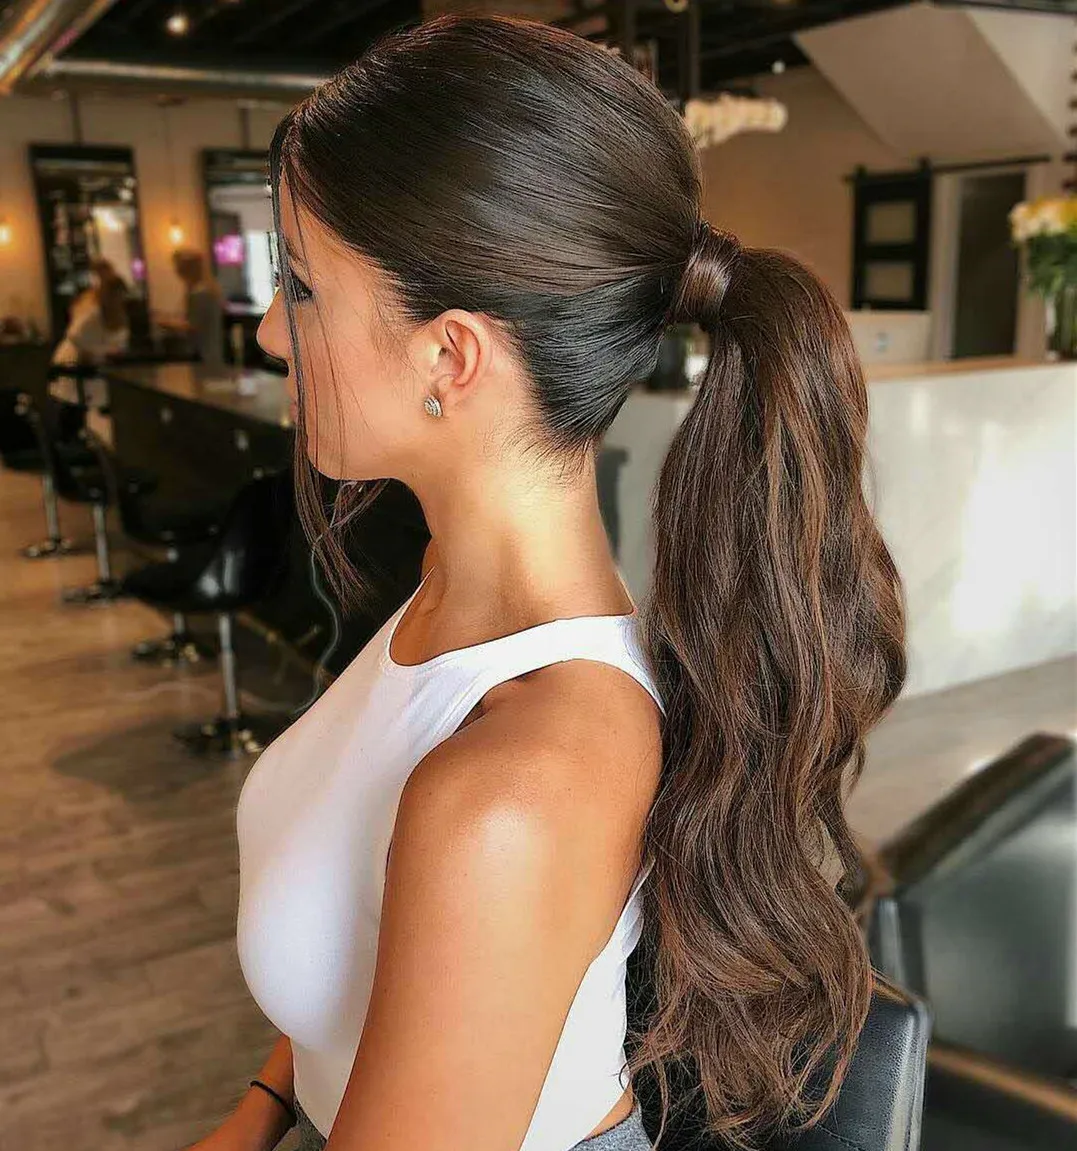 These ponytail hairstyles will take your hairstyle to the next level